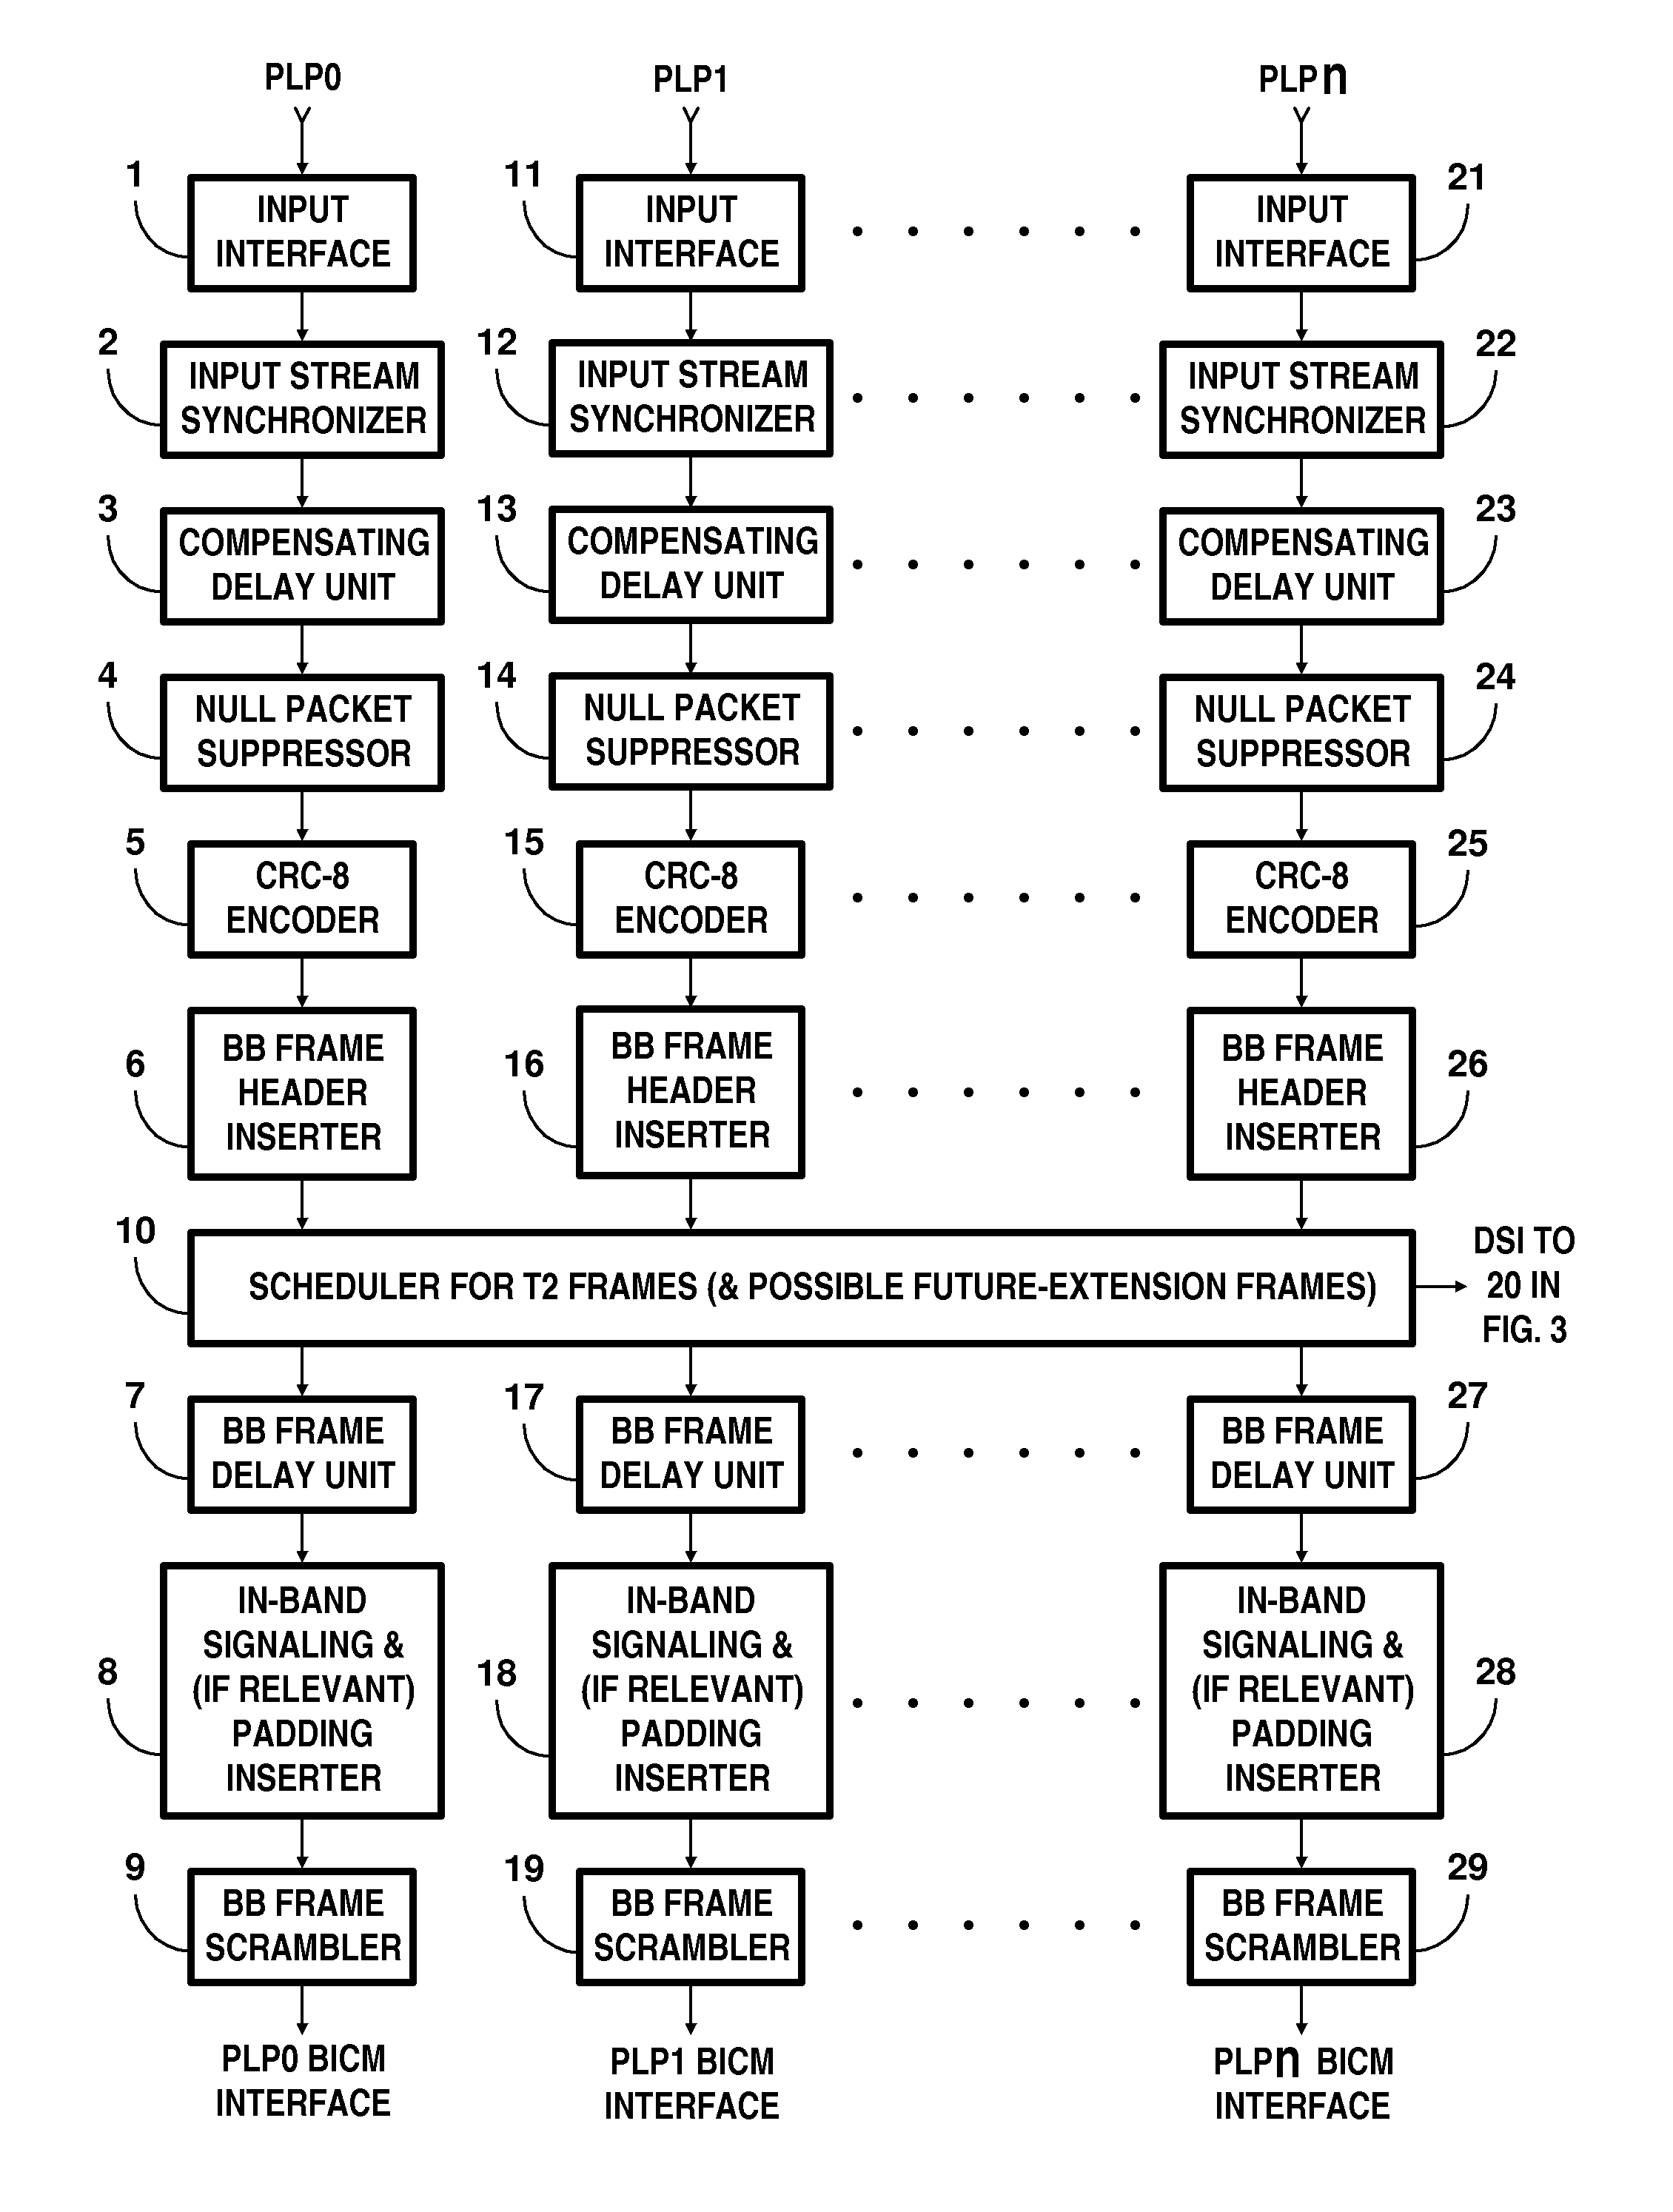 Digital television broadcasting system using coded orthogonal frequency-division modulation and multilevel LDPC convolutional coding